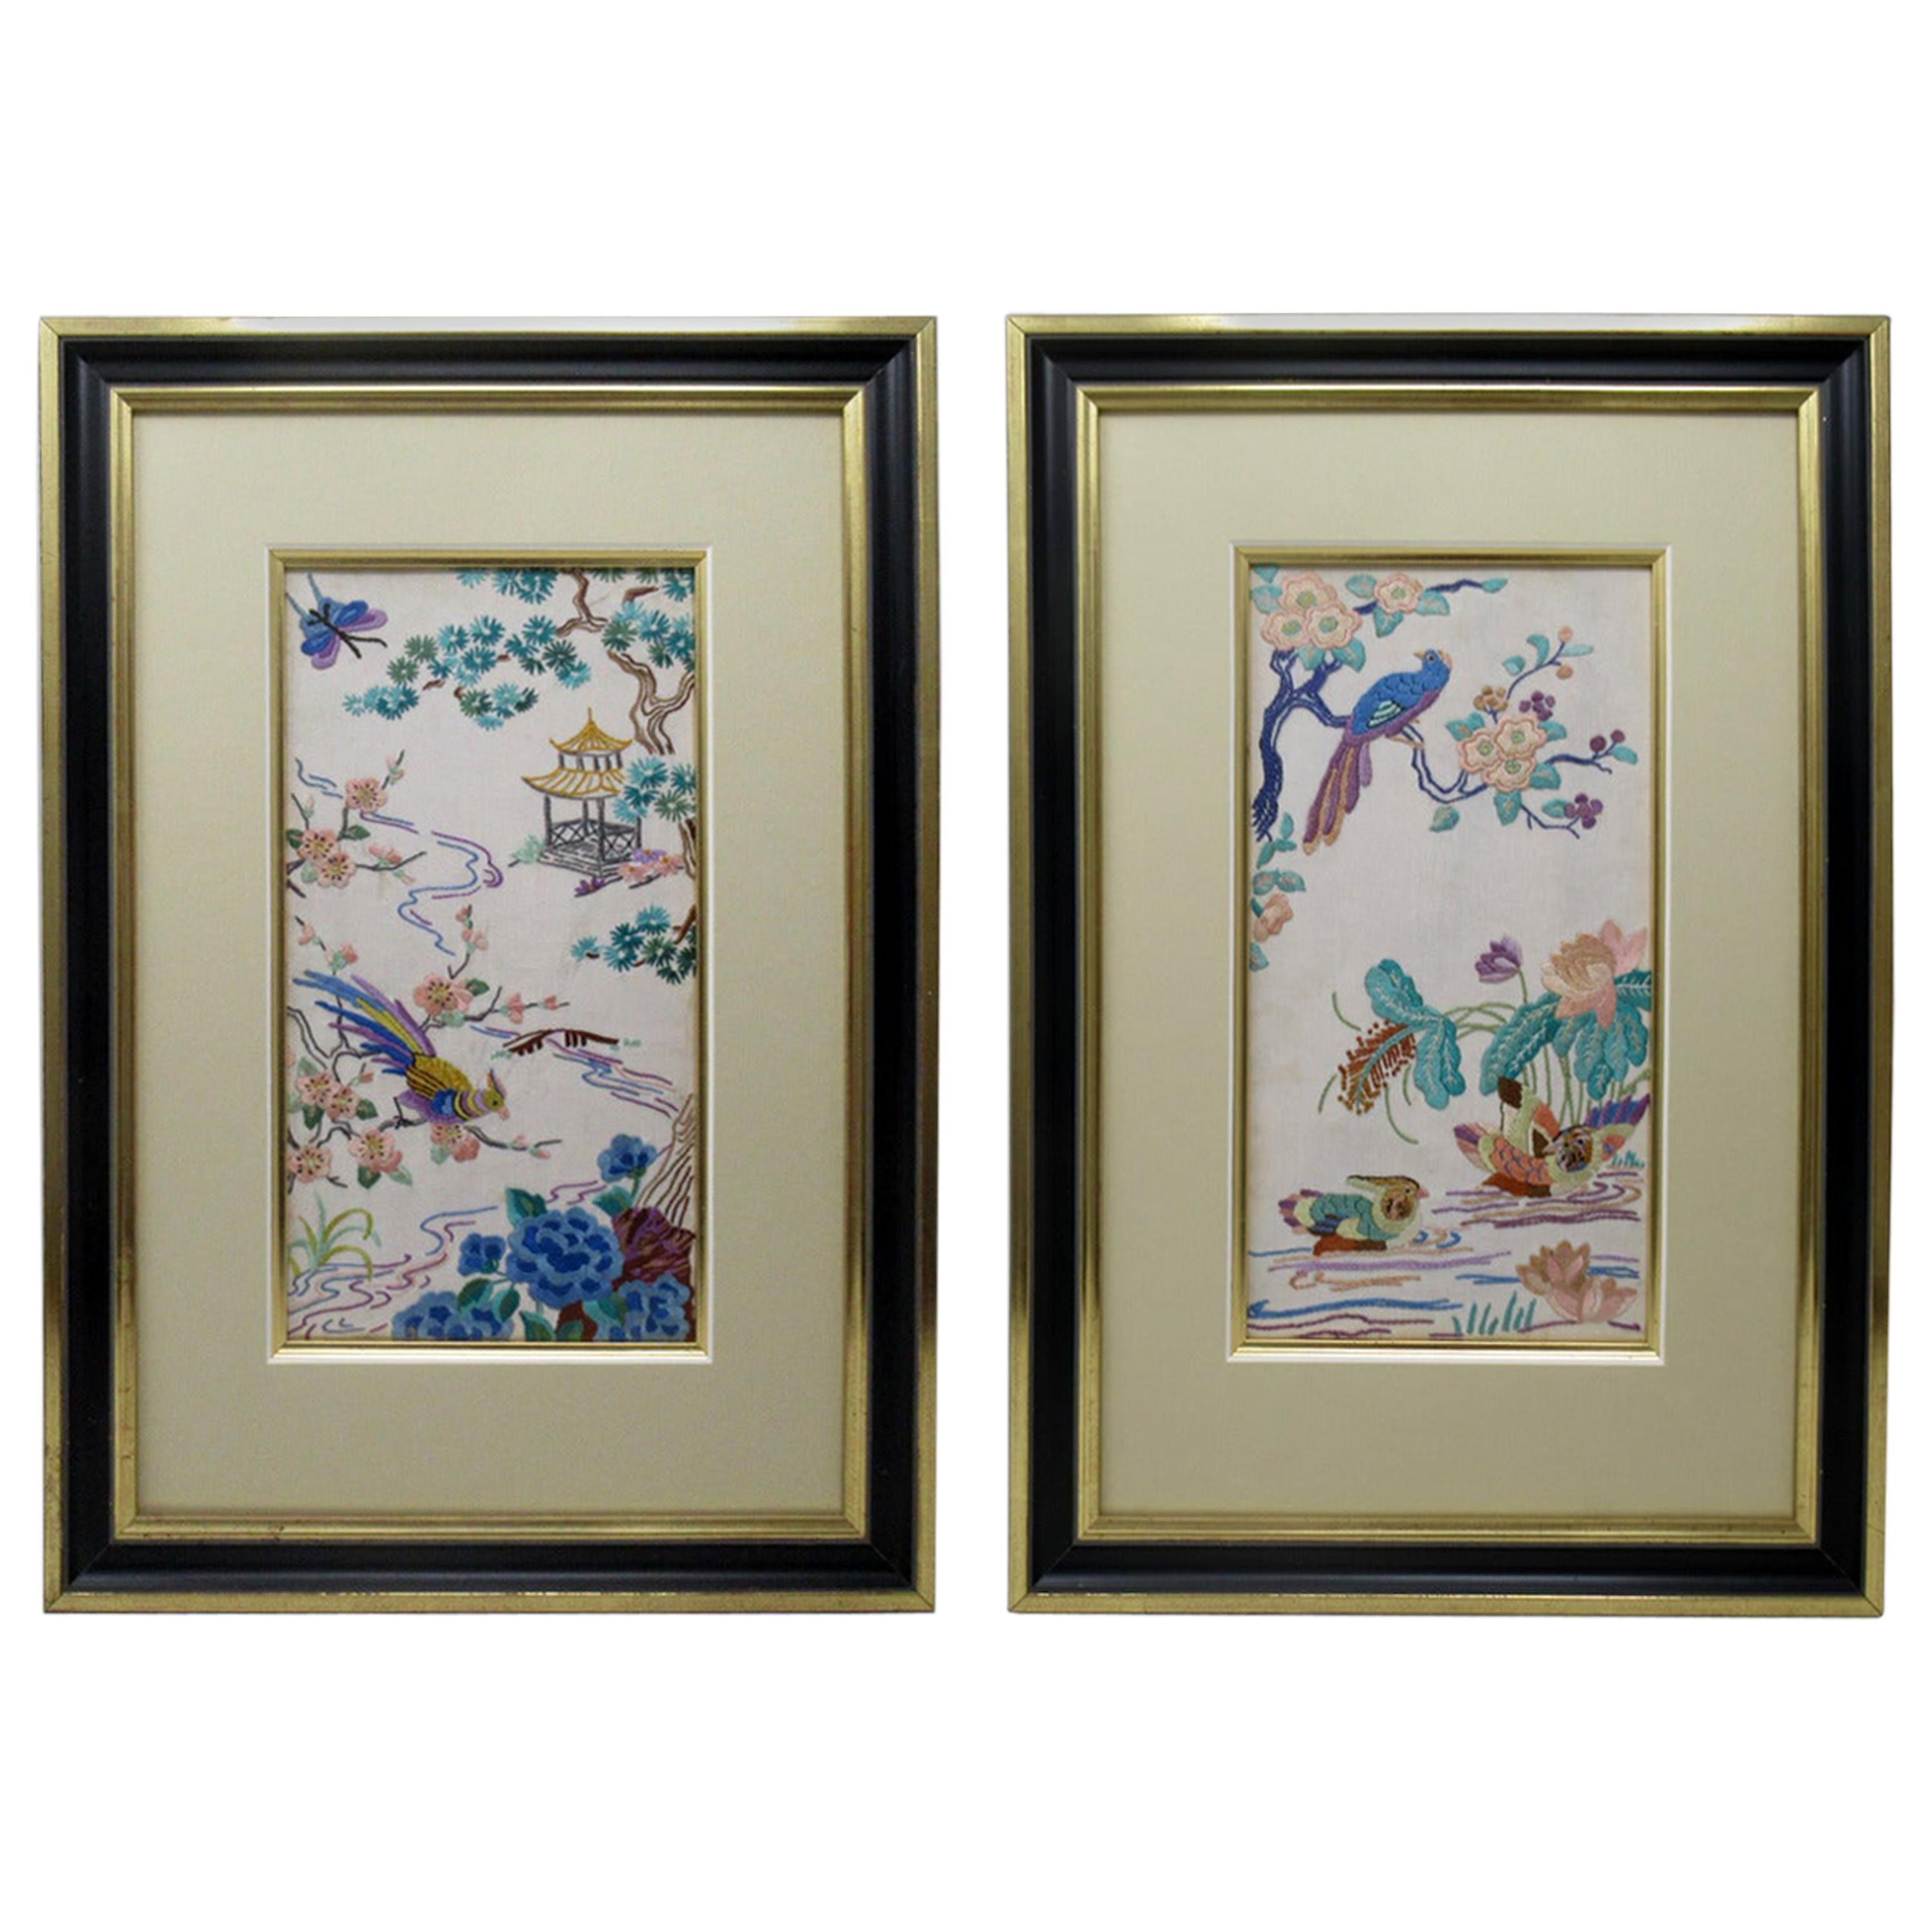 Antique Pair of Chinese Hand Embroidered Silk Pictures Panels Irish Interest